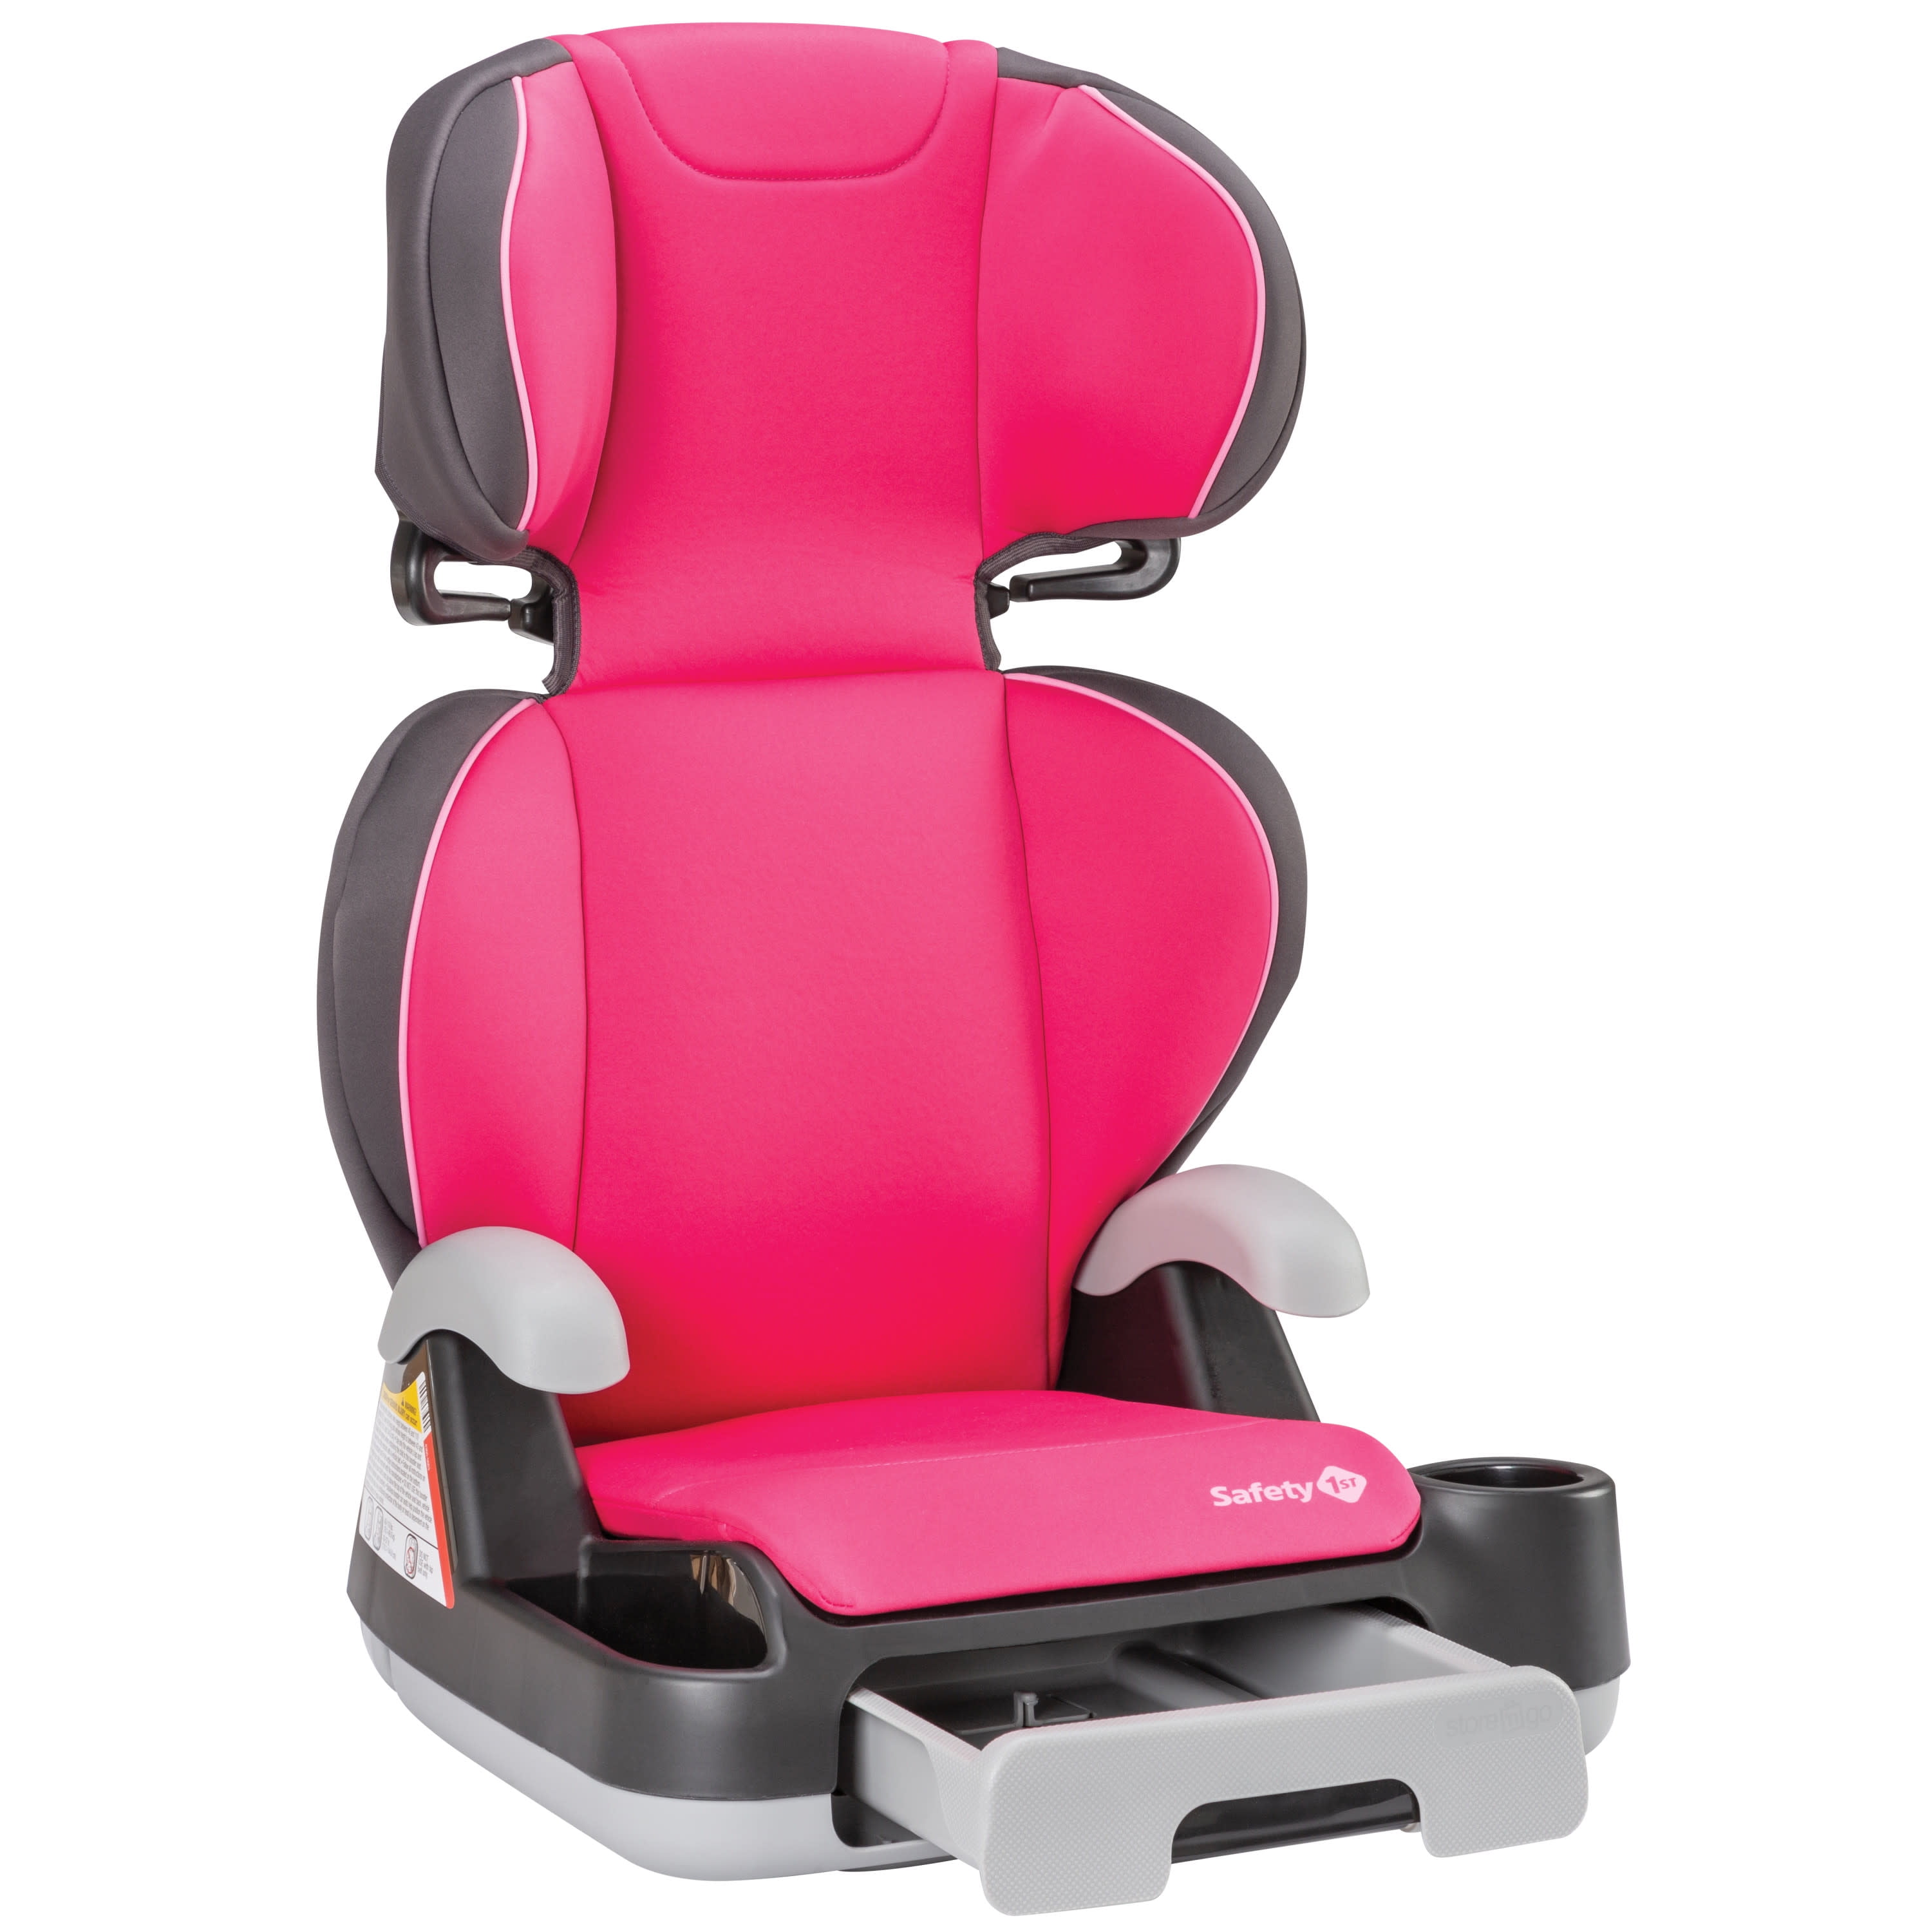 Car booster seats for kids getting better, study says - WINK News